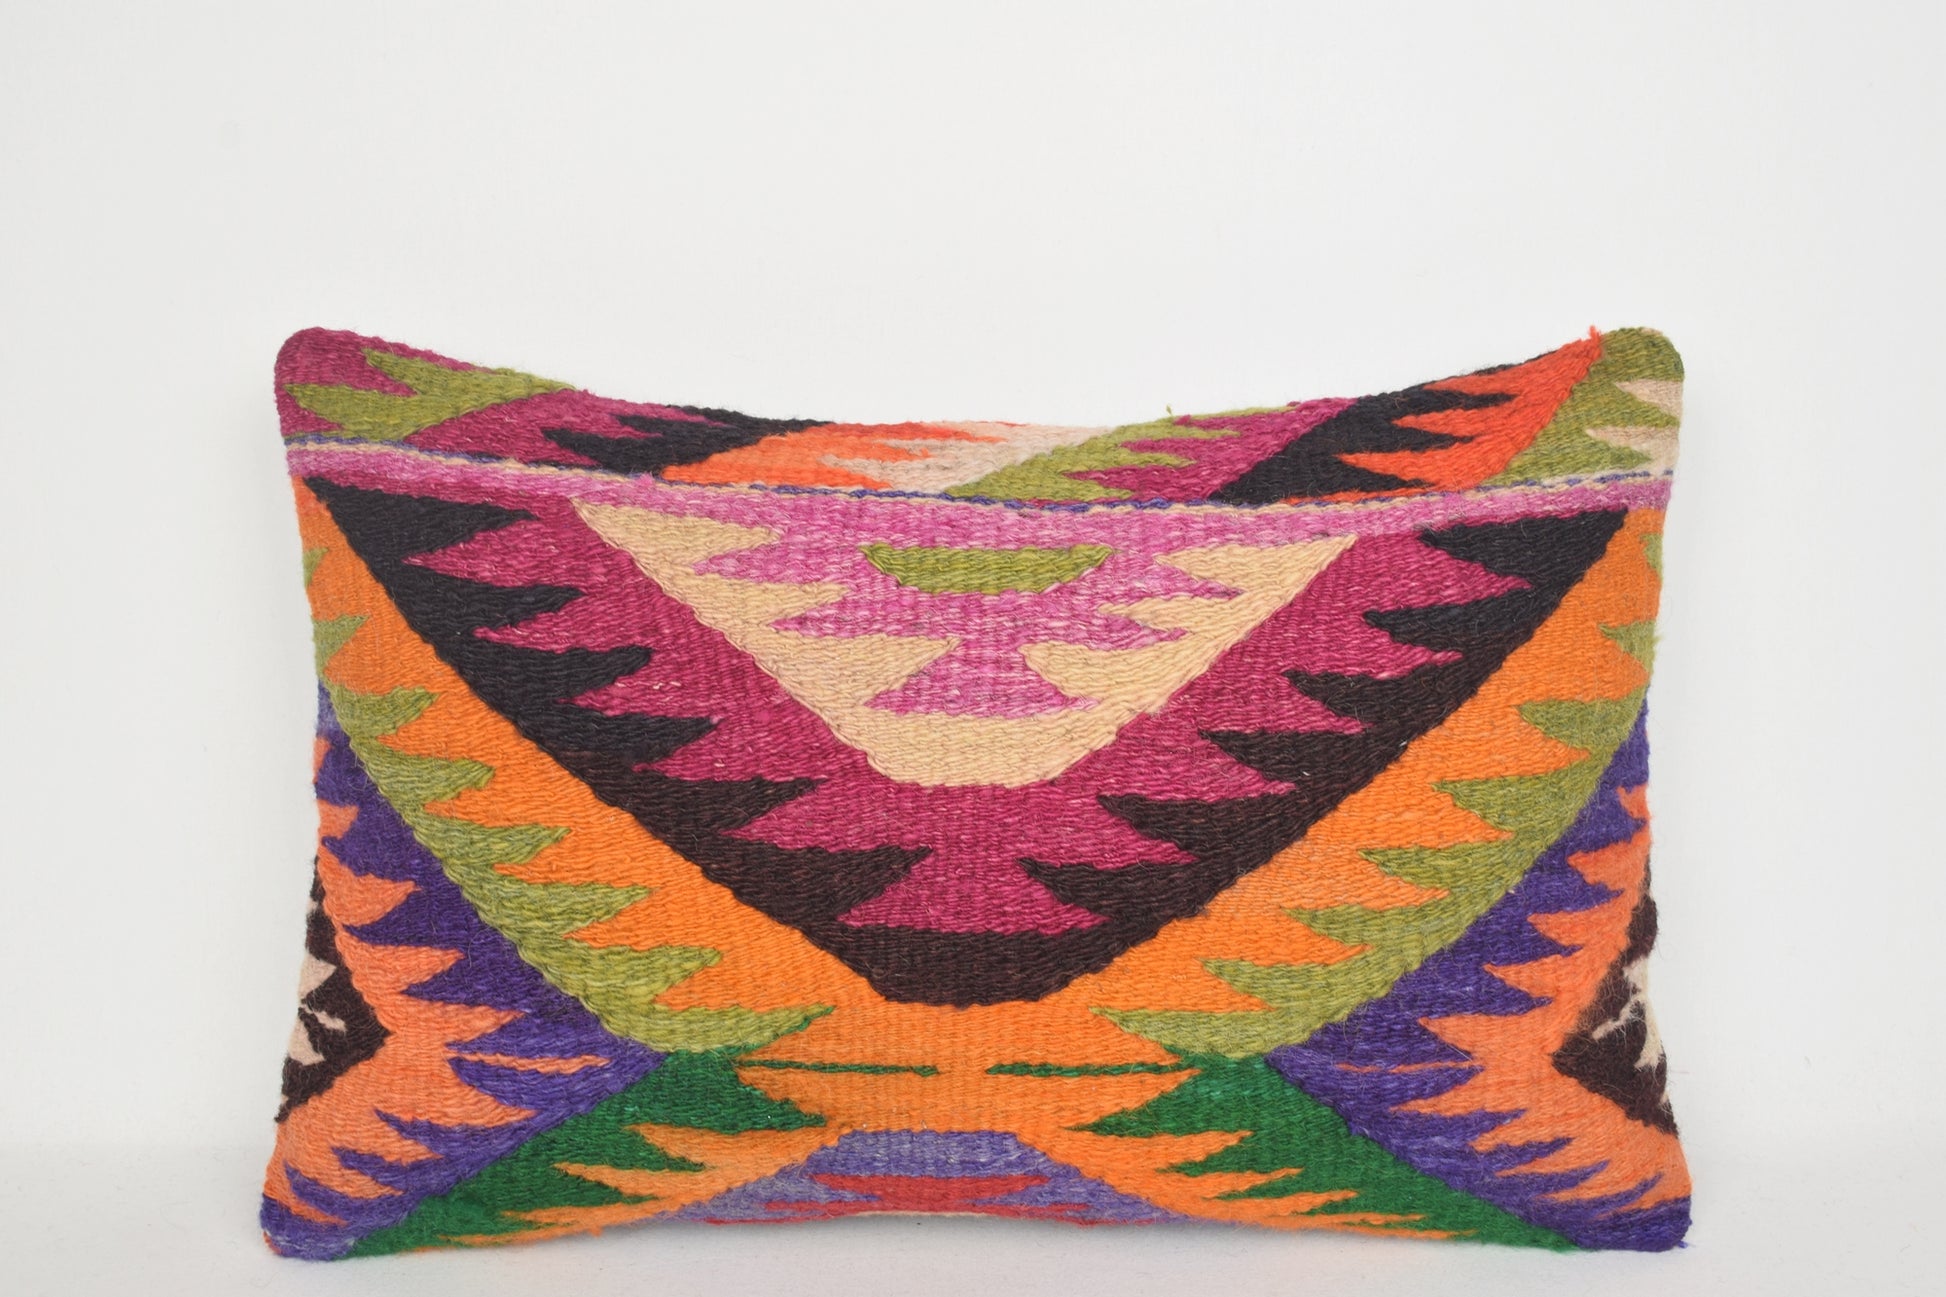 Overstock Kilim Pillows E00027 Lumbar Lifestyle Excellent Furnishing